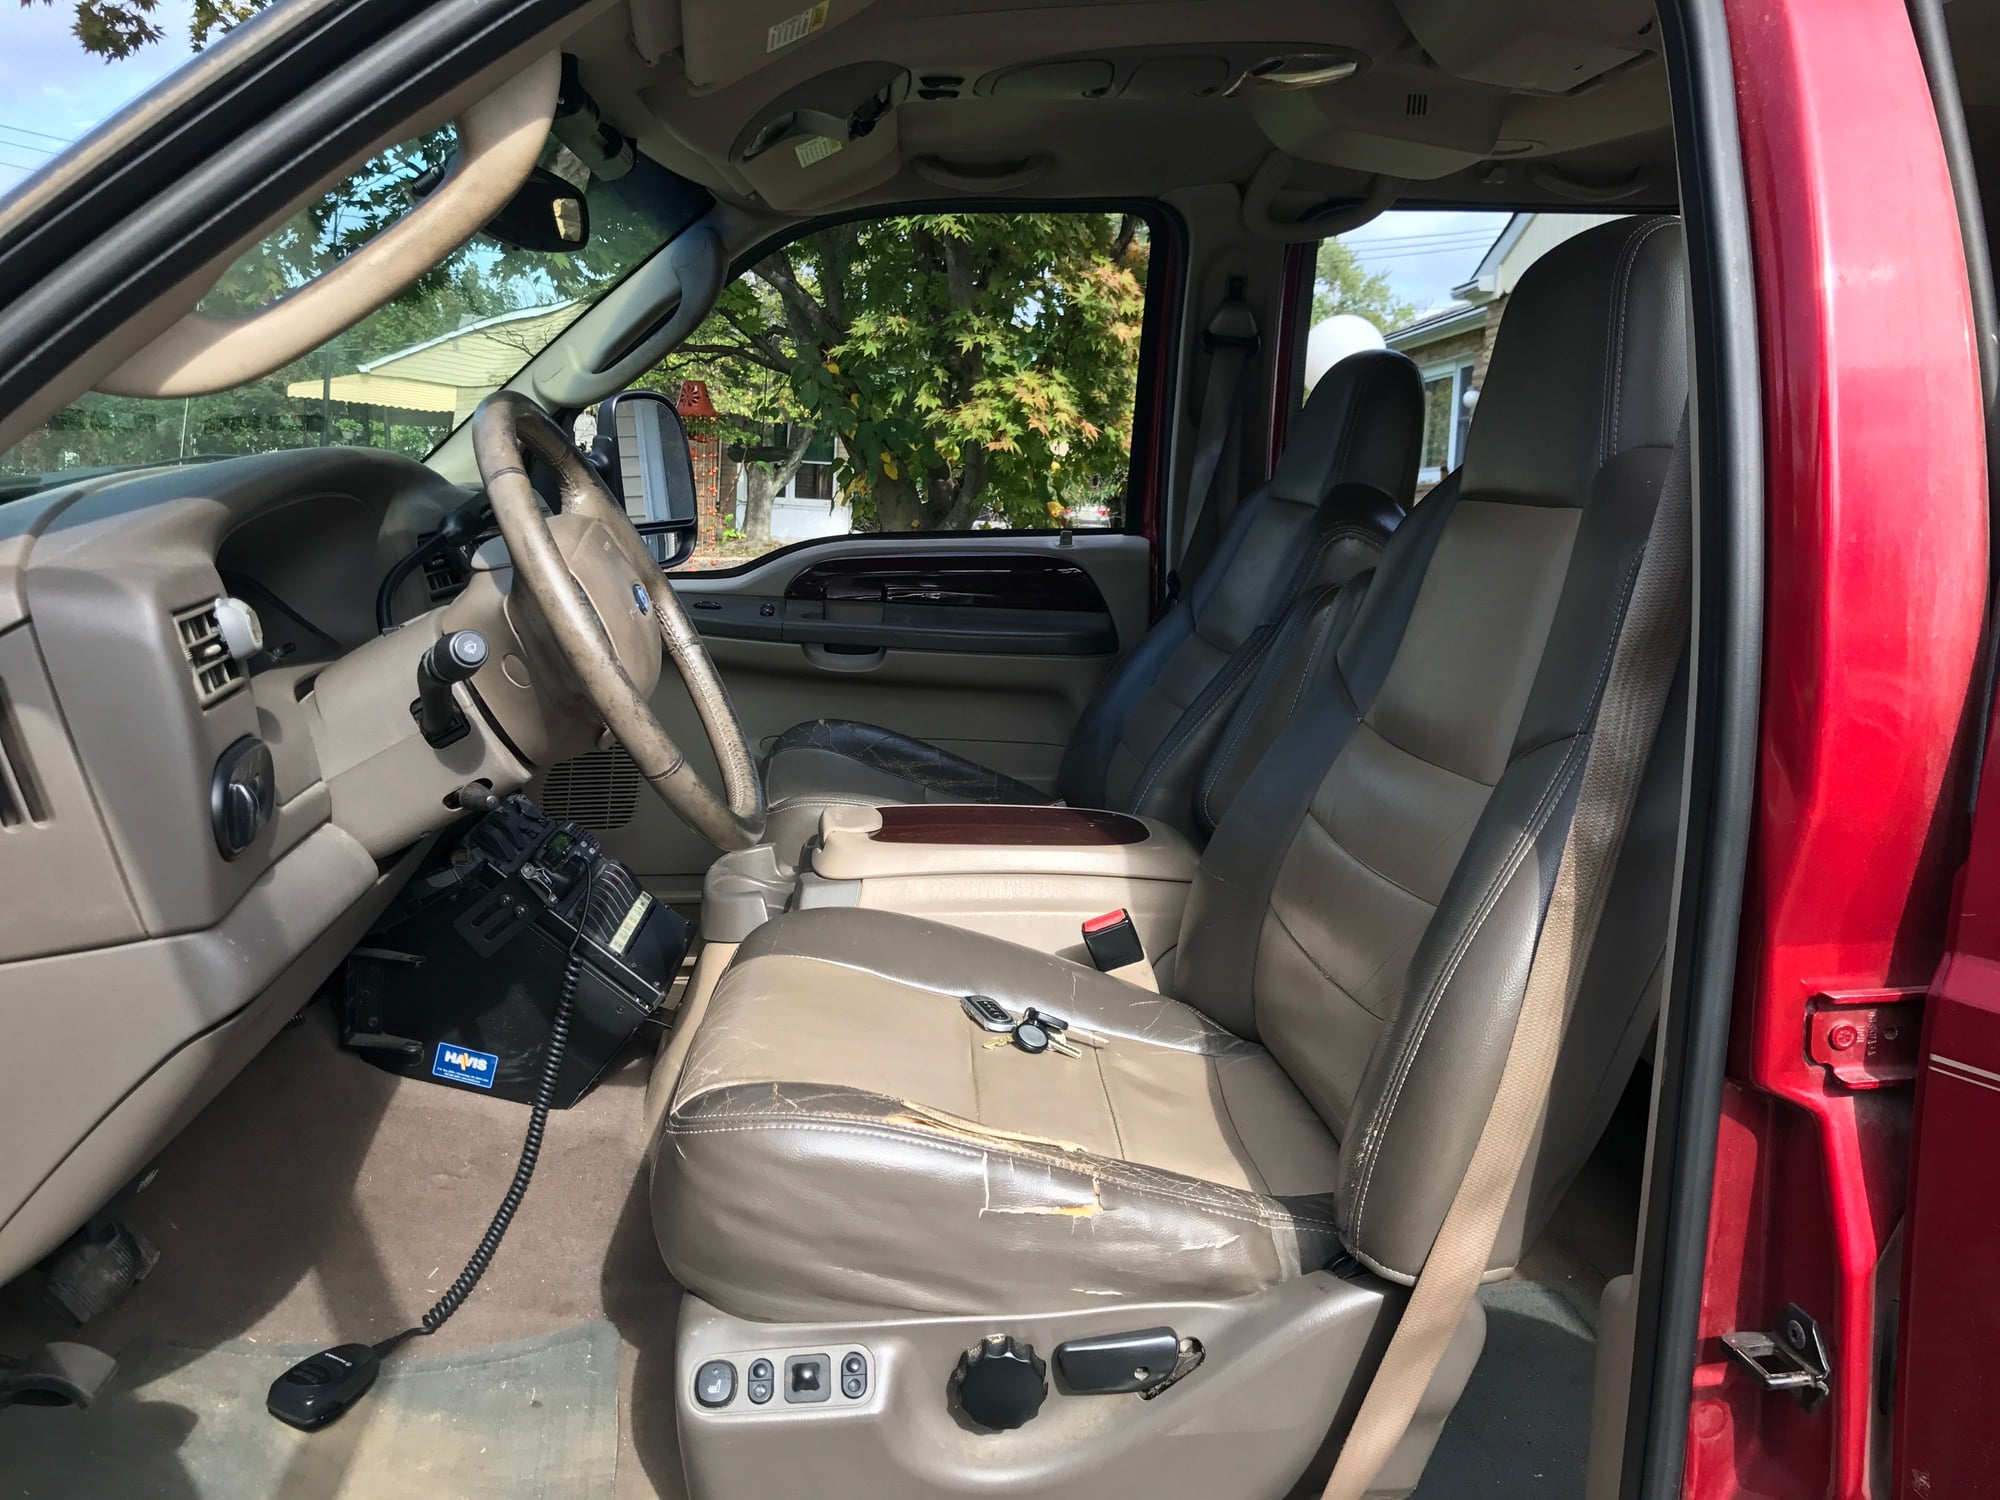 2003 Ford Excursion - 2003 Ford Excursion Eddie Bauer - Used - VIN 1FMNU45S83ED06023 - 185,000 Miles - 10 cyl - 4WD - Automatic - SUV - Red - Lambertrville, NJ 08530, United States